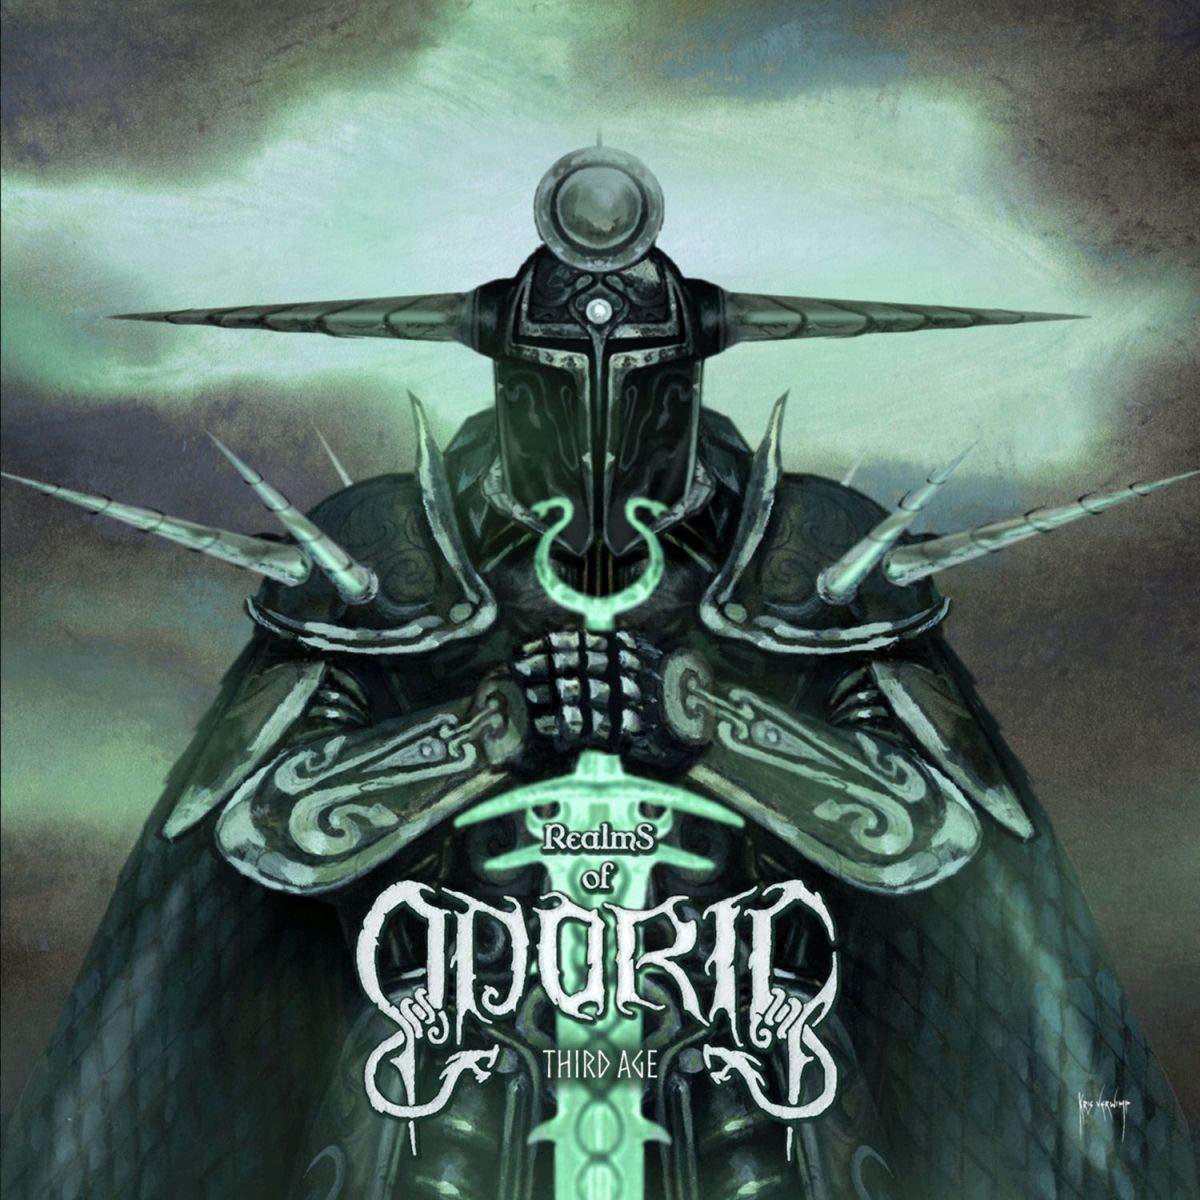 (CD) - Realms - Of Odoric Age Third